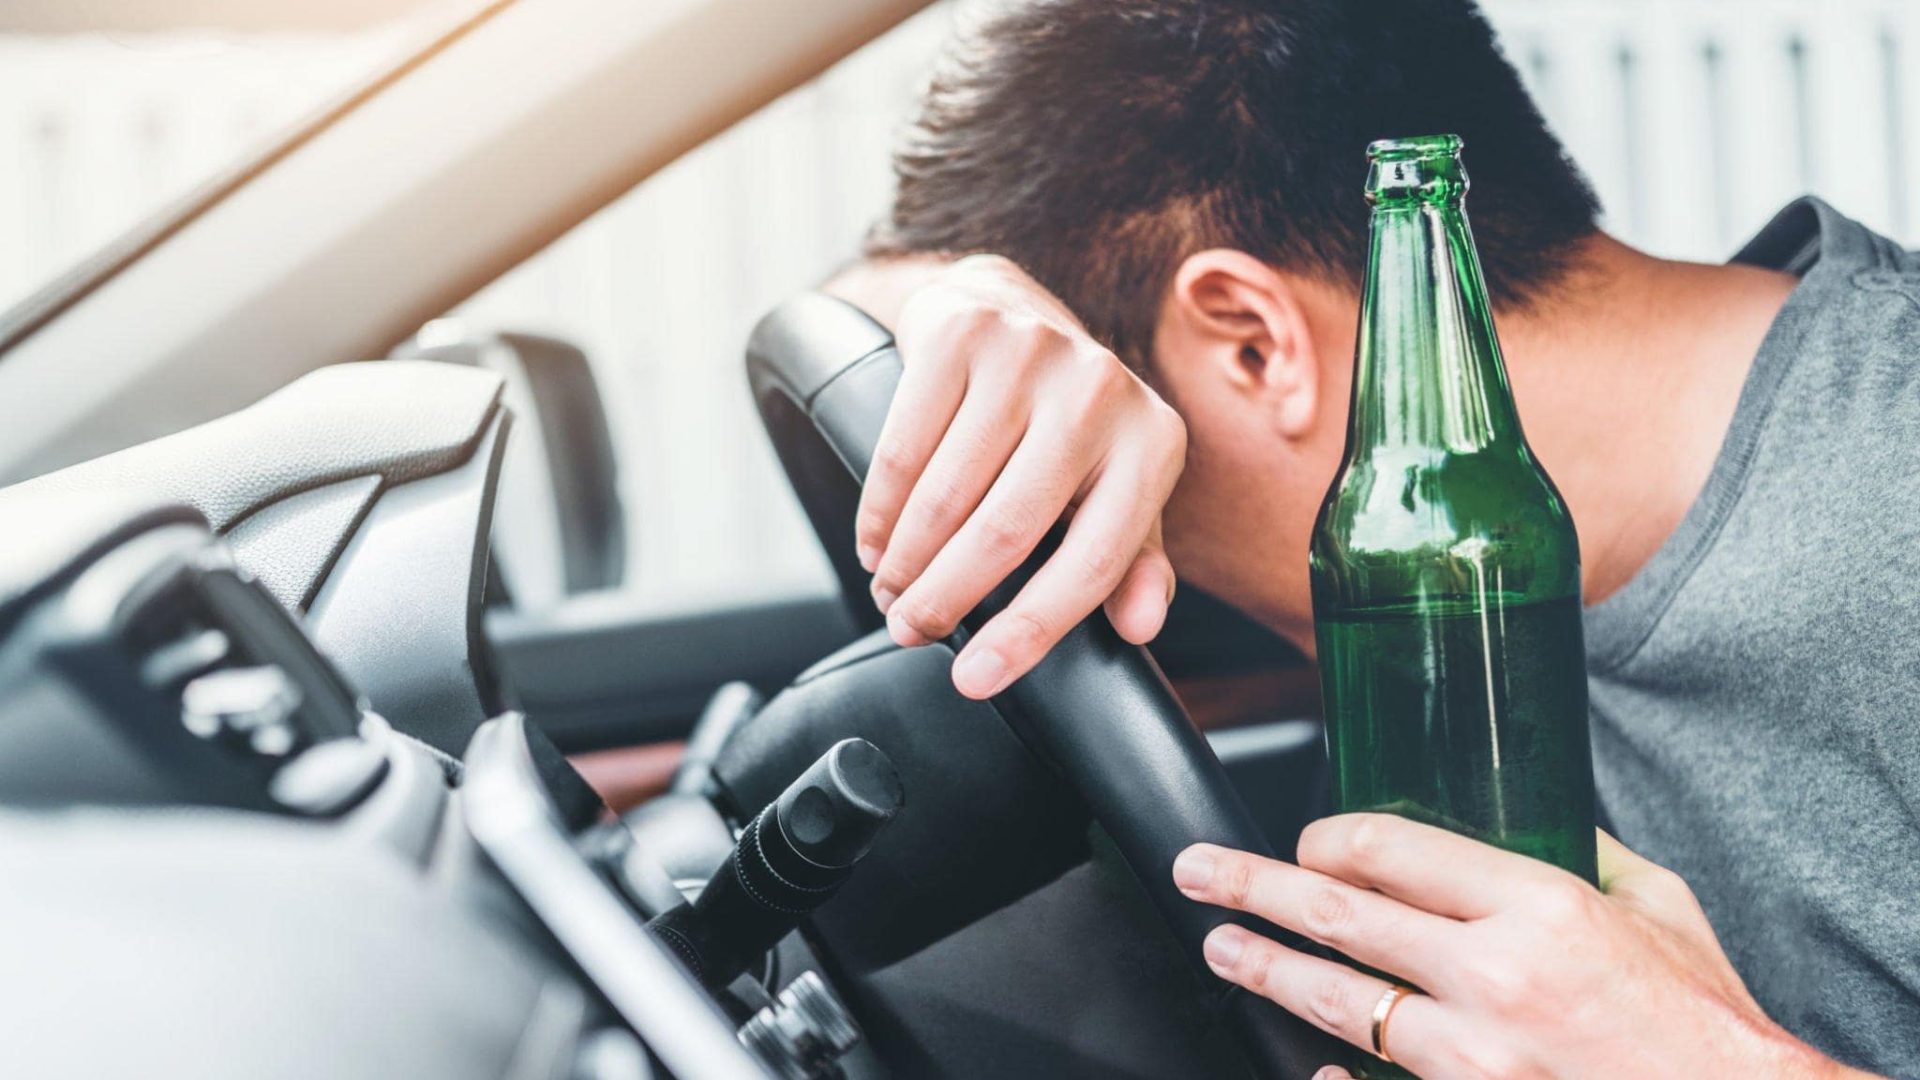 A drunk driver hit me in an auto accident, how does that affect my case